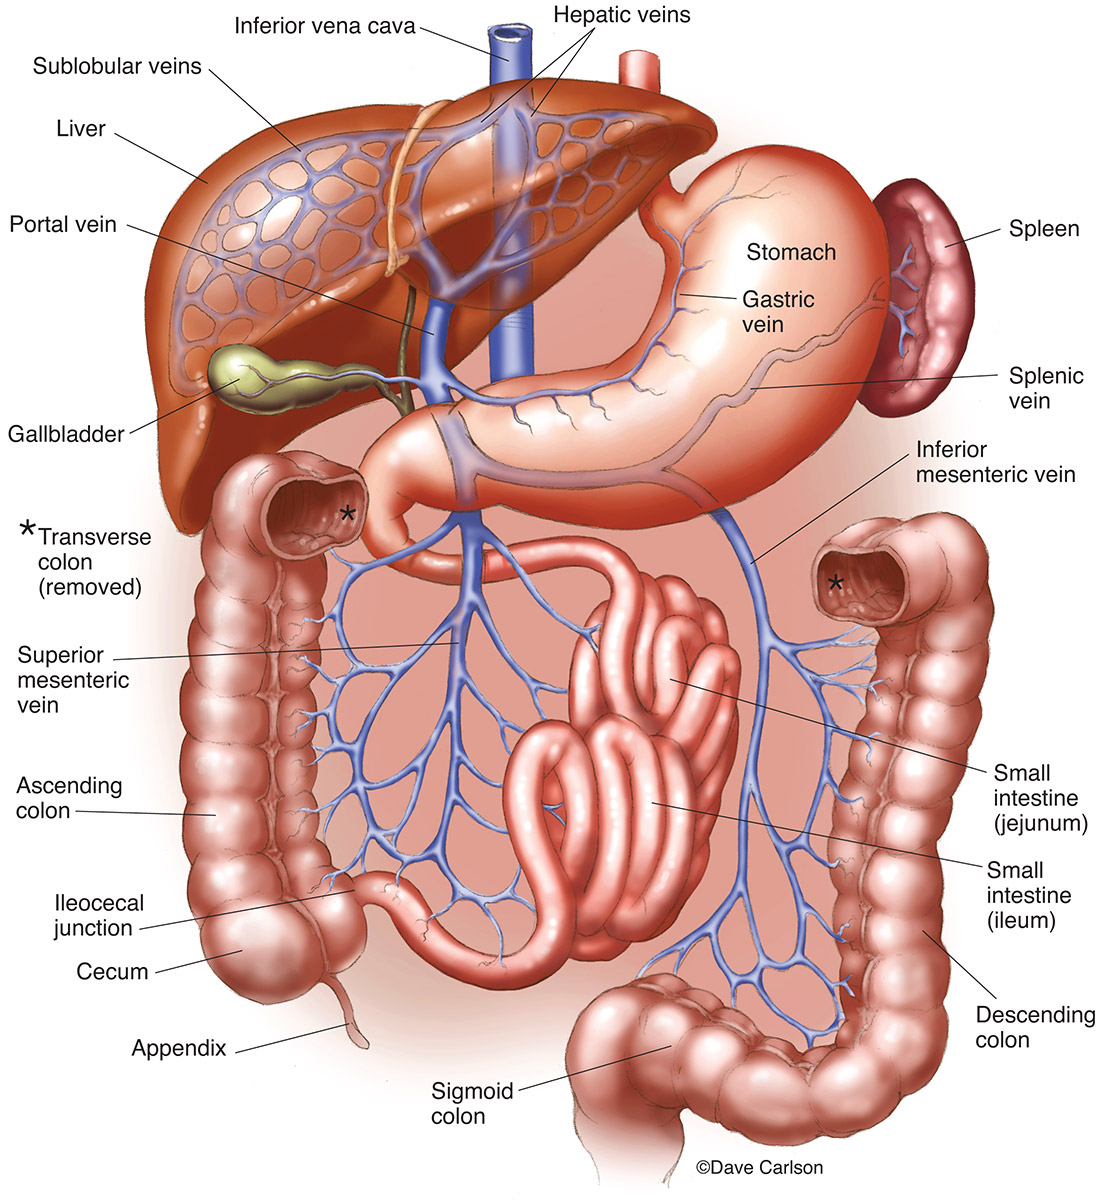 Illustration of the major veins that carry blood from the digestive organs to the liver.